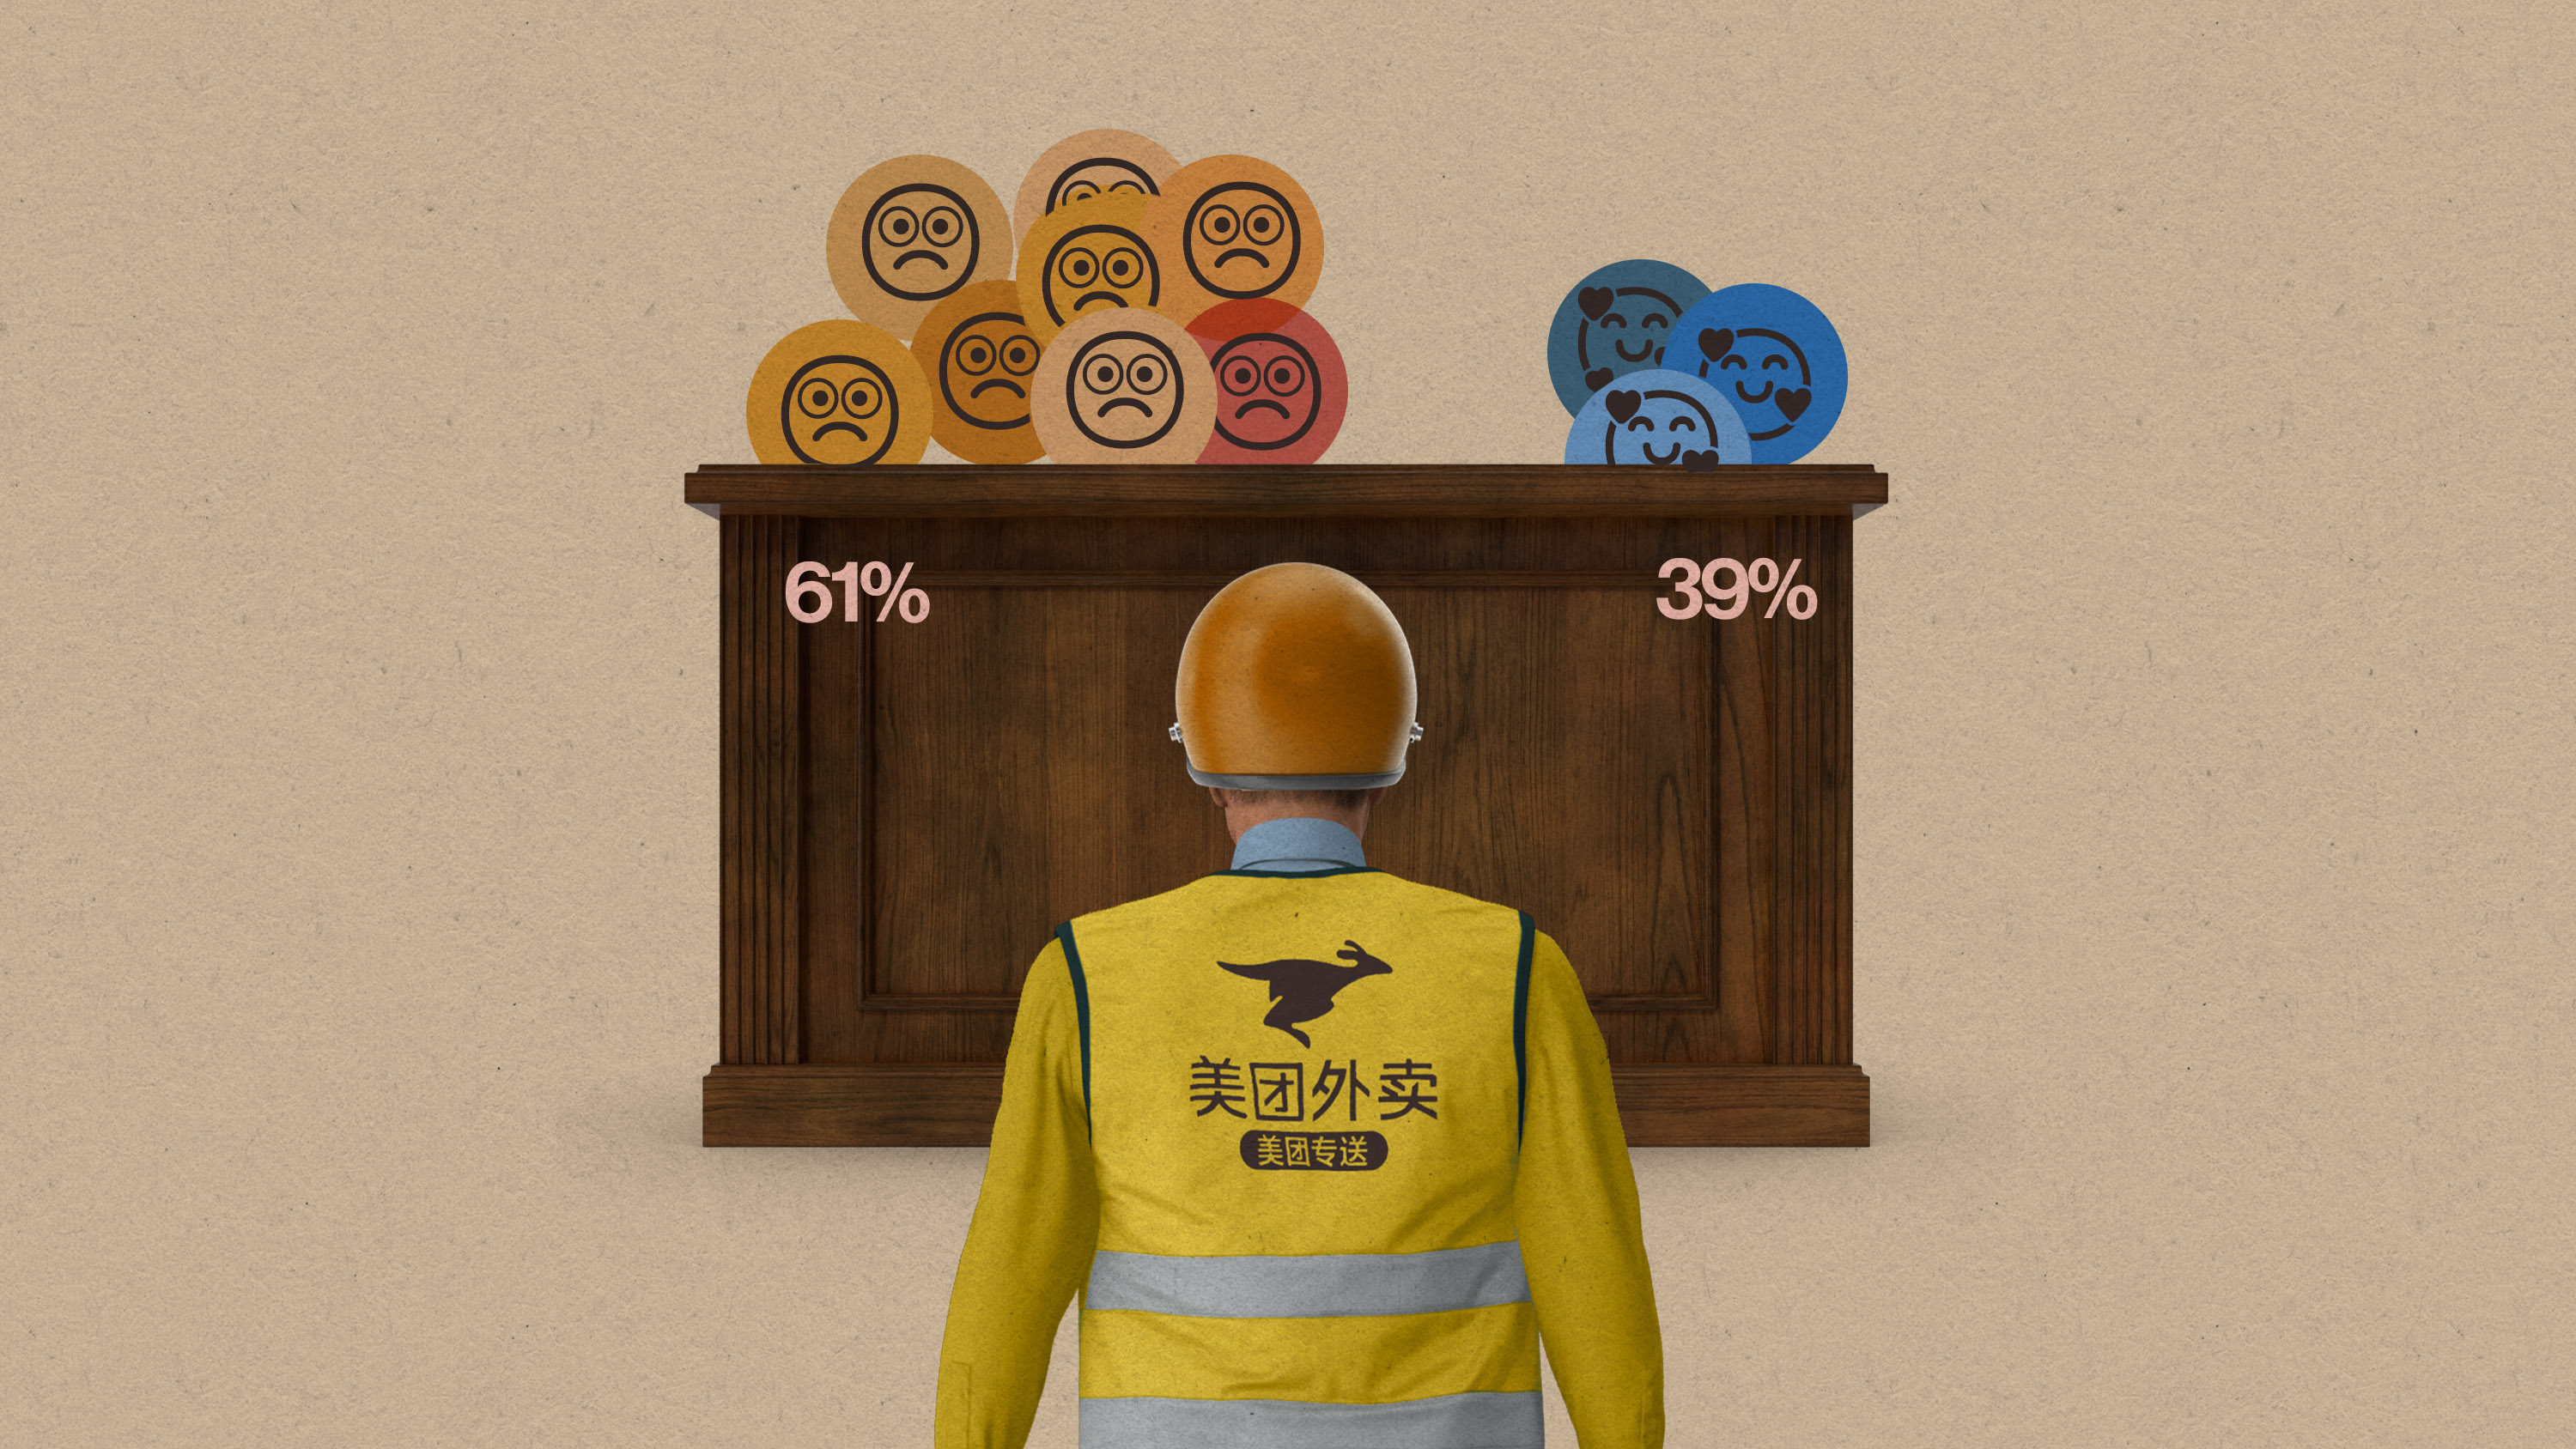 a jury of emojis decides on a delivery service person in a Meituan outfit